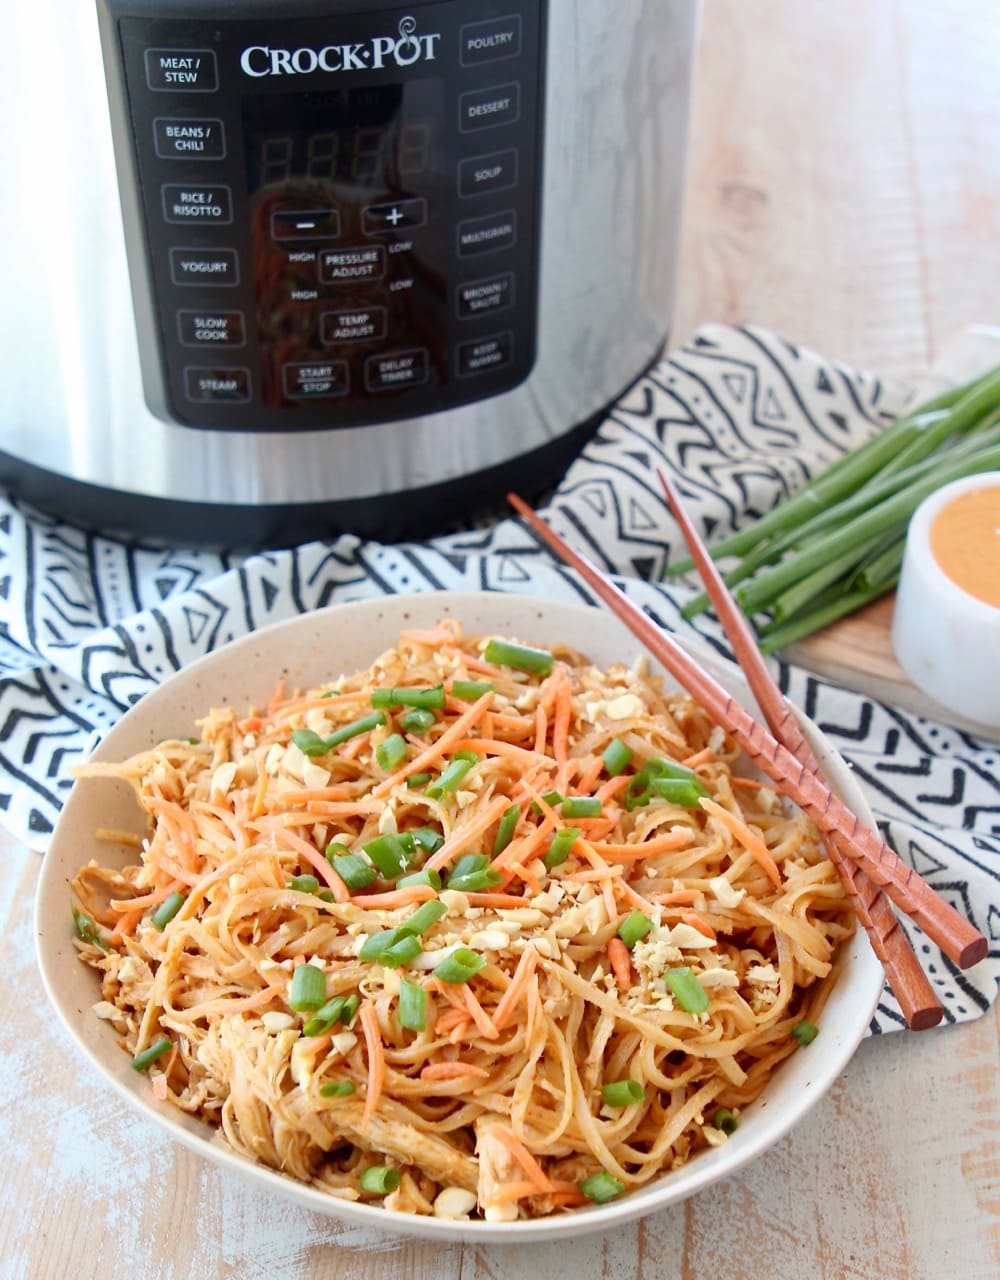 Thai peanut chicken noodles in bowl with chopsticks and Crock Pot Express Crock Multi Cooker